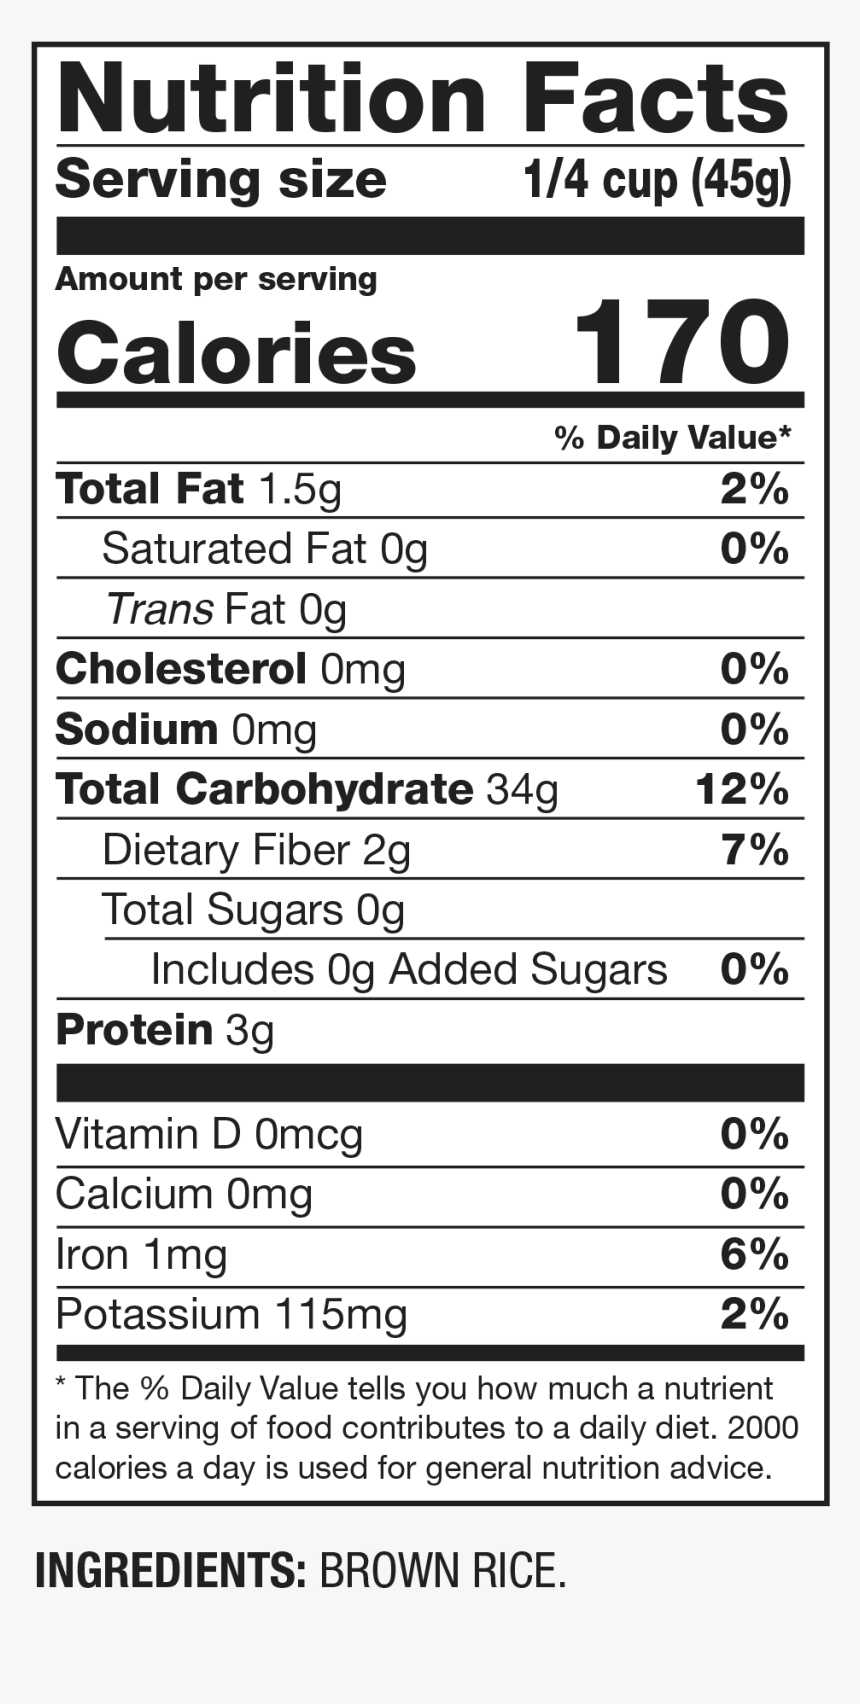 Nutrition Facts Whole Grain Brown Rice - Crystal Farms String Cheese Nutrition Label, HD Png Download, Free Download